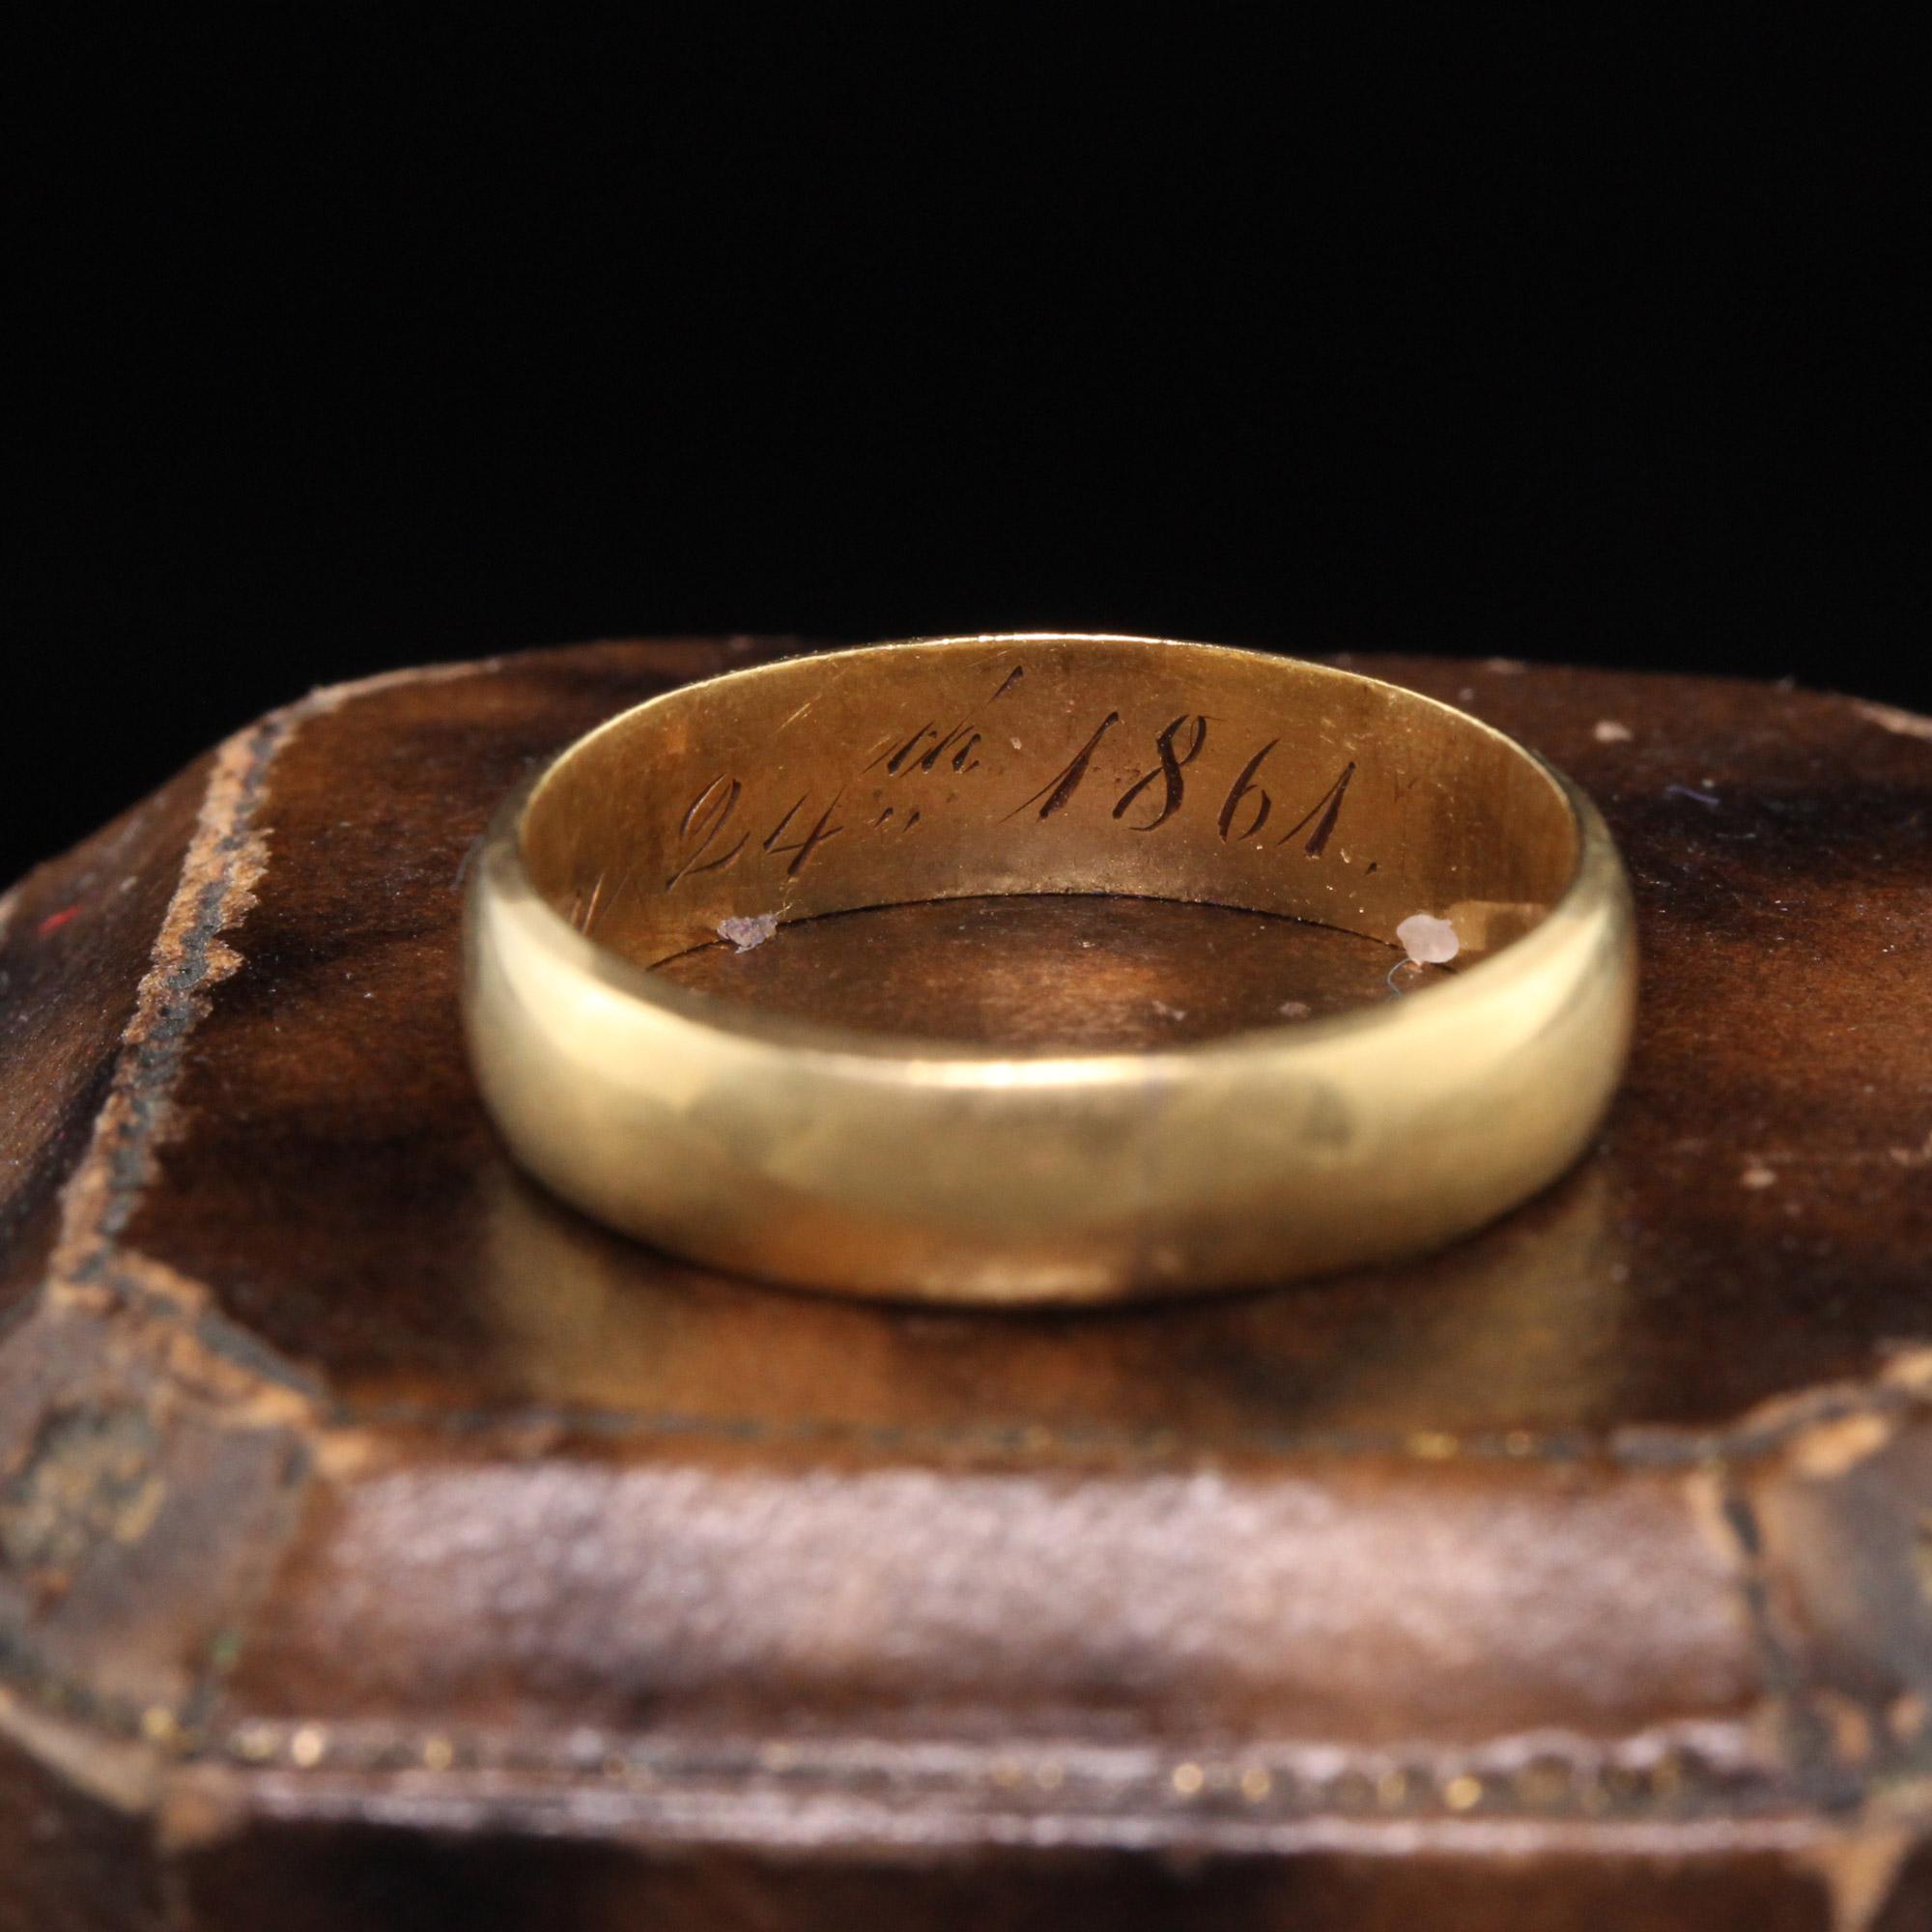 Beautiful Antique Victorian 18K Yellow Gold Engraved Wedding Band - Size 4 3/4. This simple wedding band is finely crafted and has 